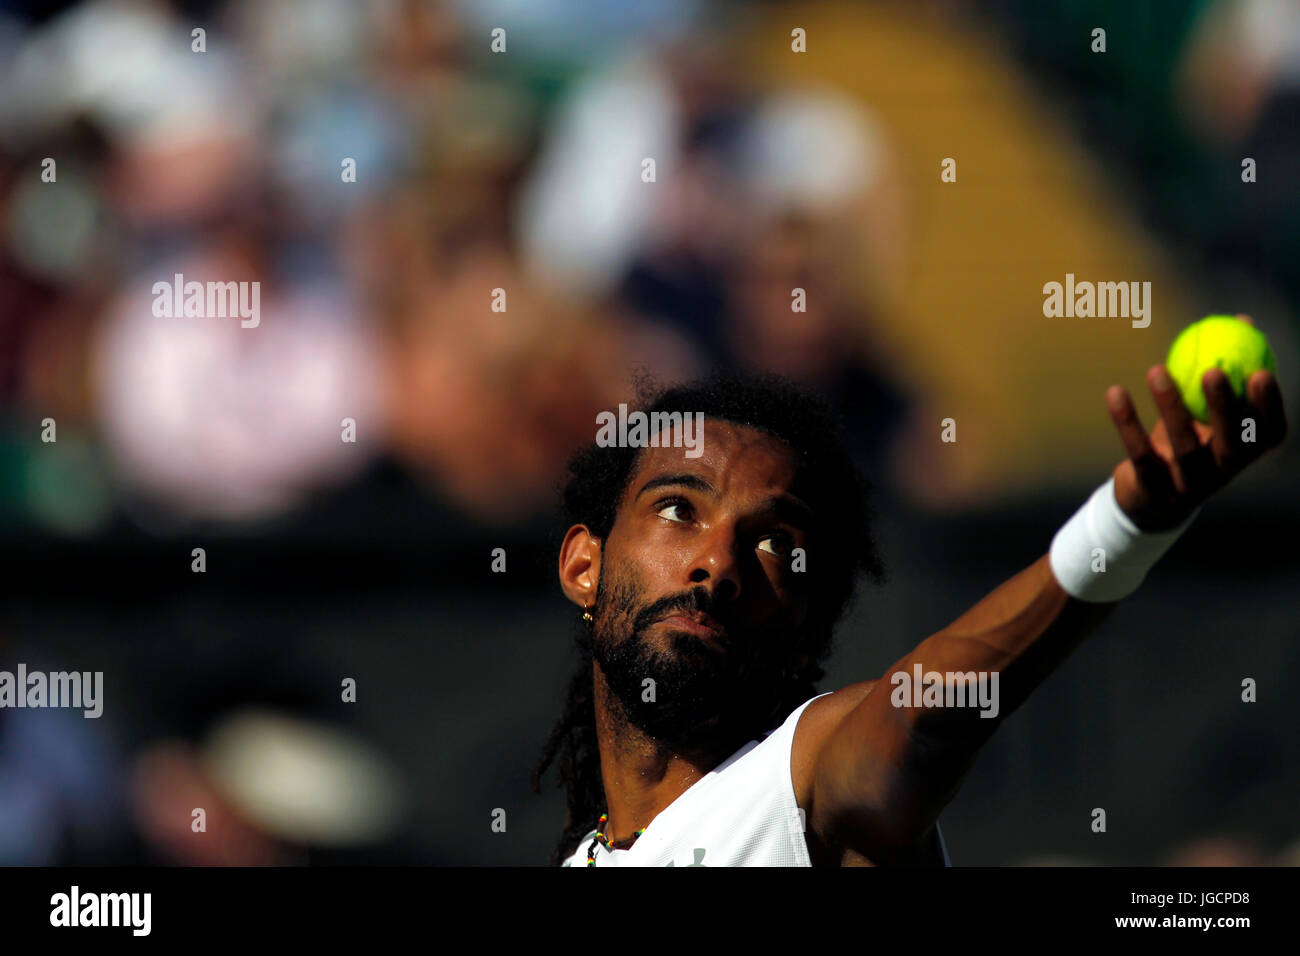 London, UK. 05th July, 2017. London, 5 July, 2017 - Dustin Brown of Germany serving during his second round match against Andy Murray at Wimbledon. Credit: Adam Stoltman/Alamy Live News Stock Photo